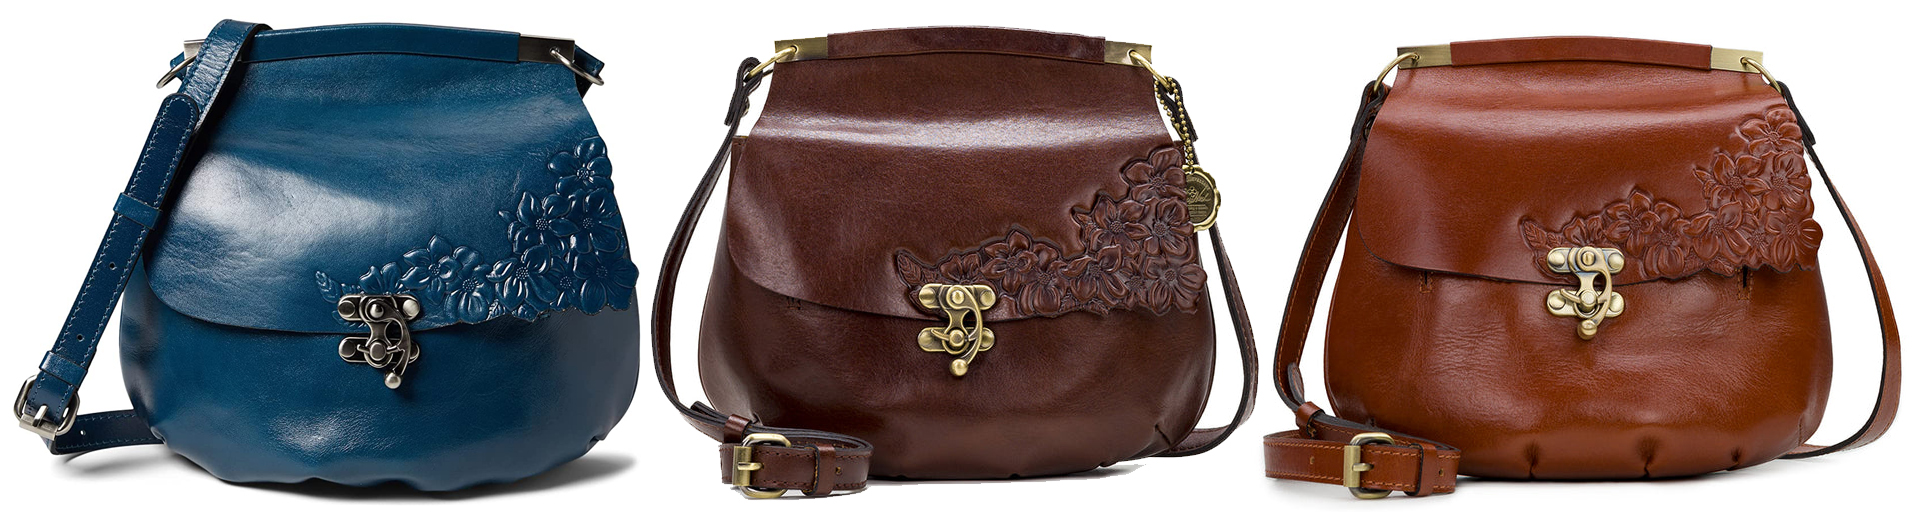 The Veneto Crossbody boasts a minimalist profile and Patricia Nash's deep embossed grape leaf logo at the front